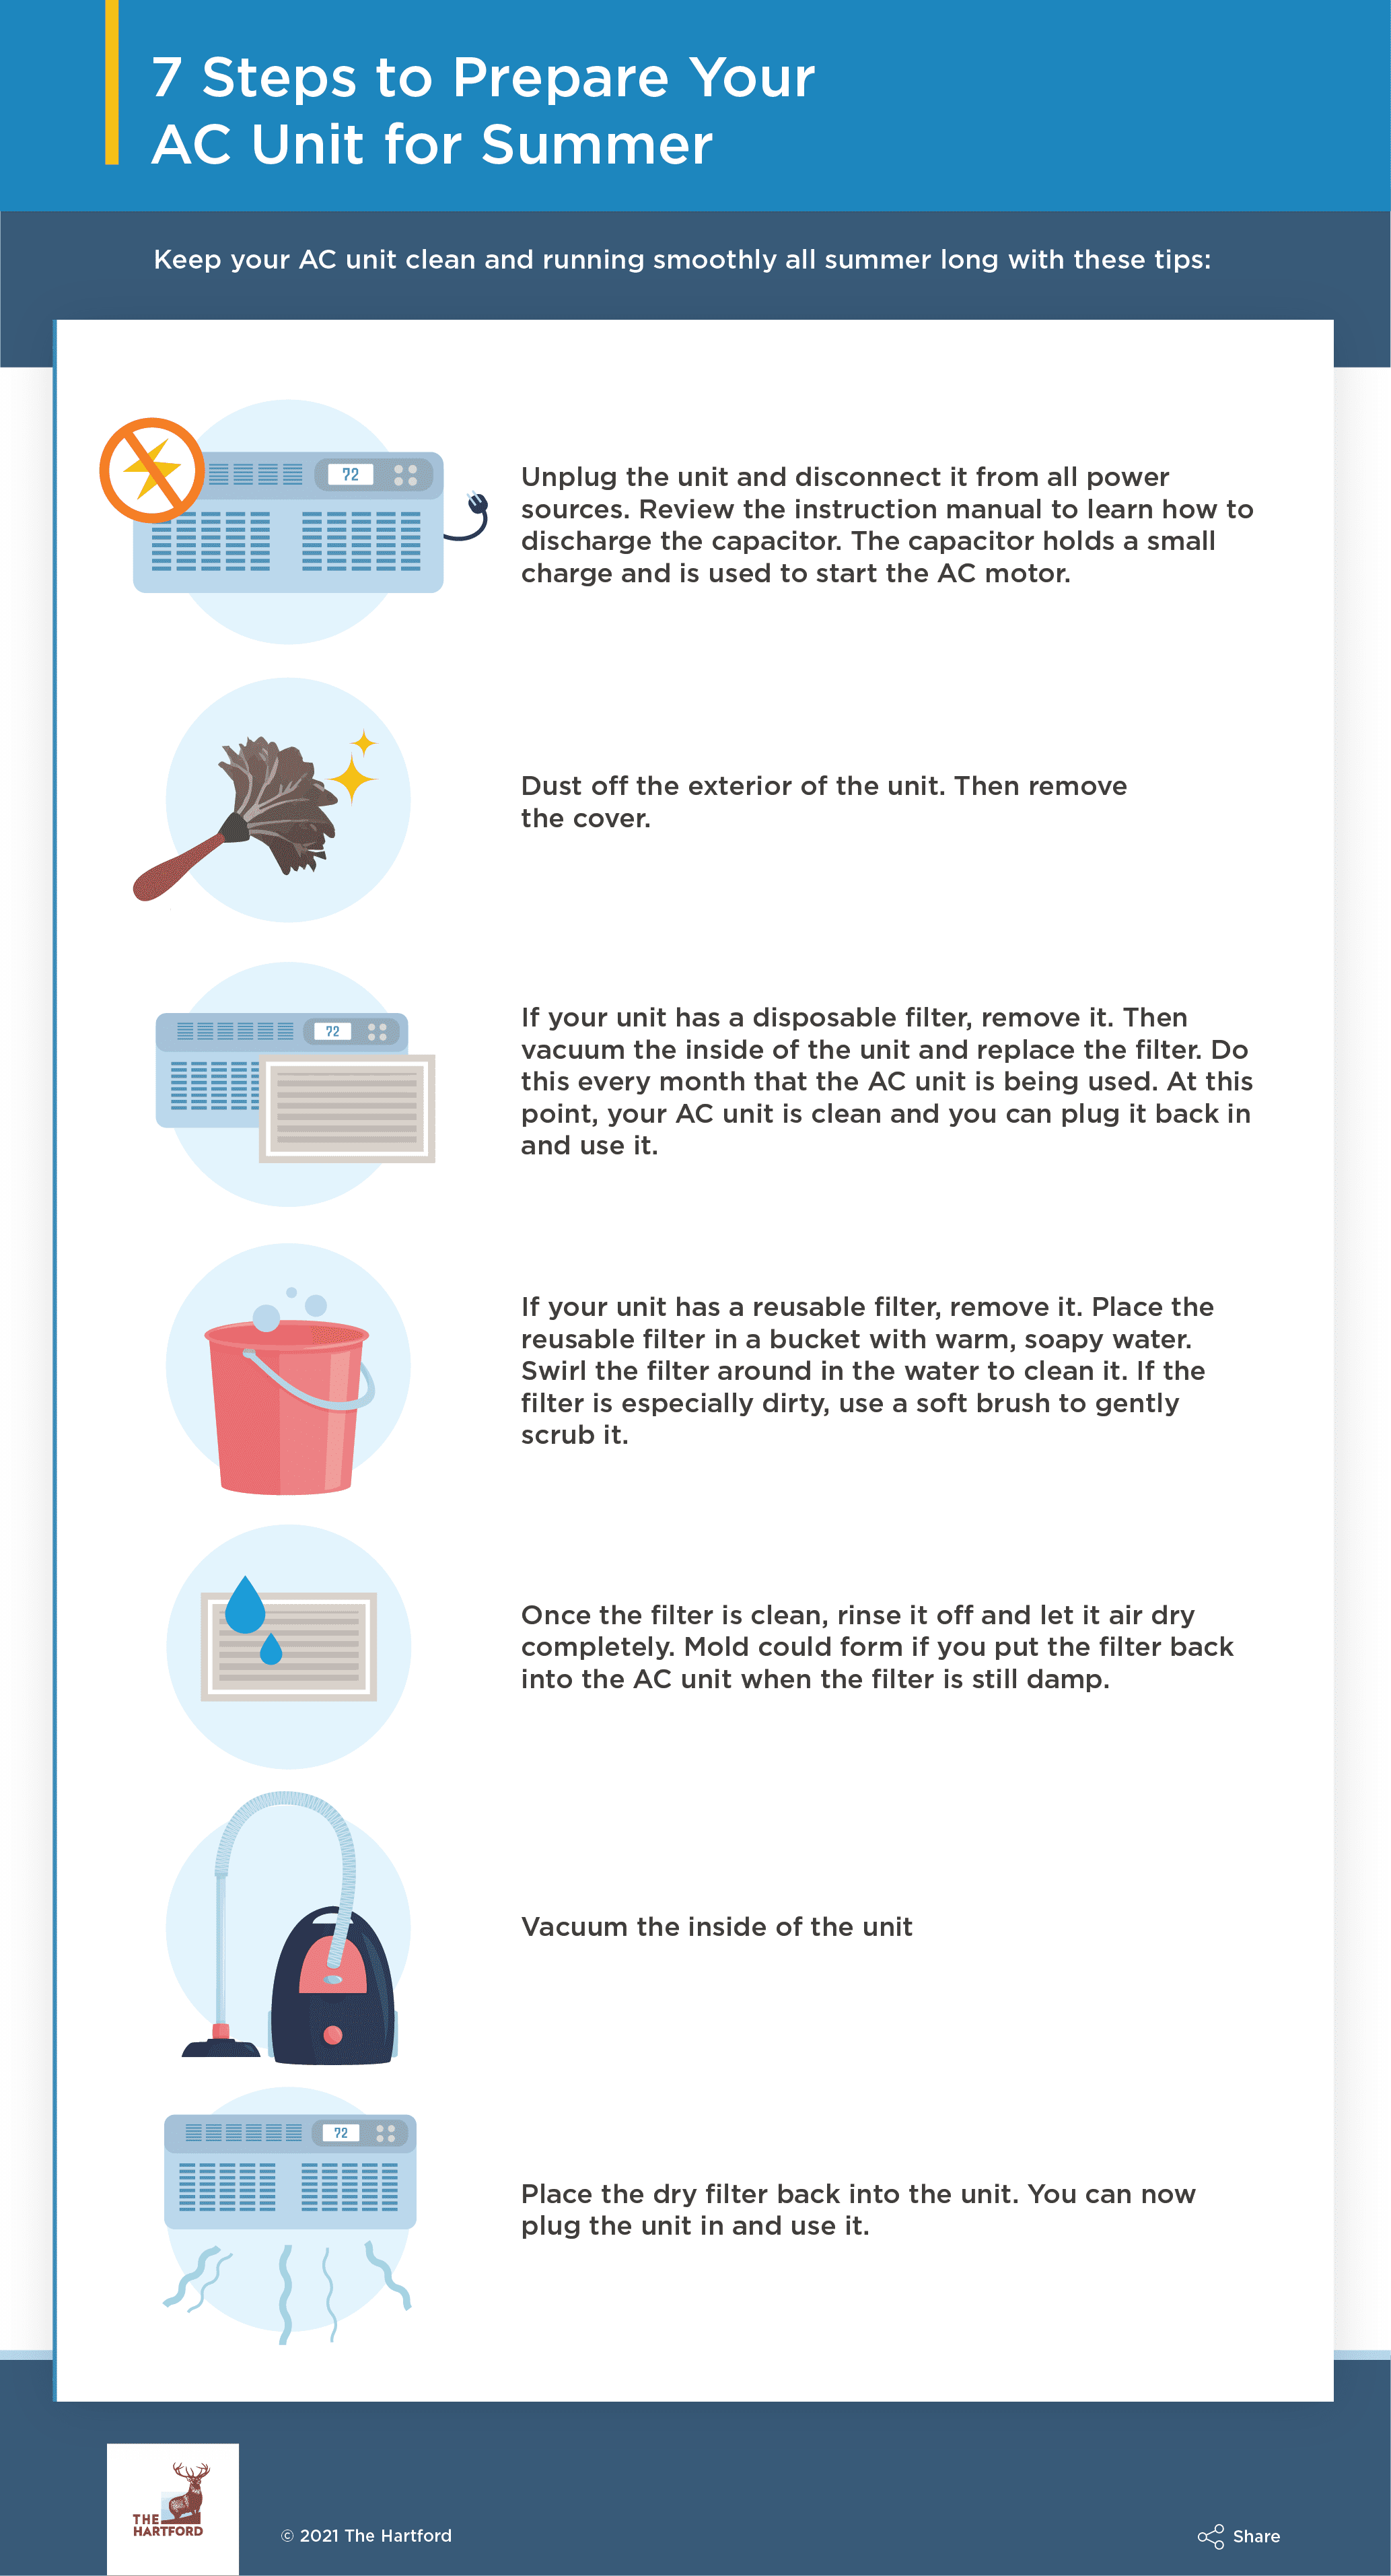 7 steps to prepare AC unit infographic